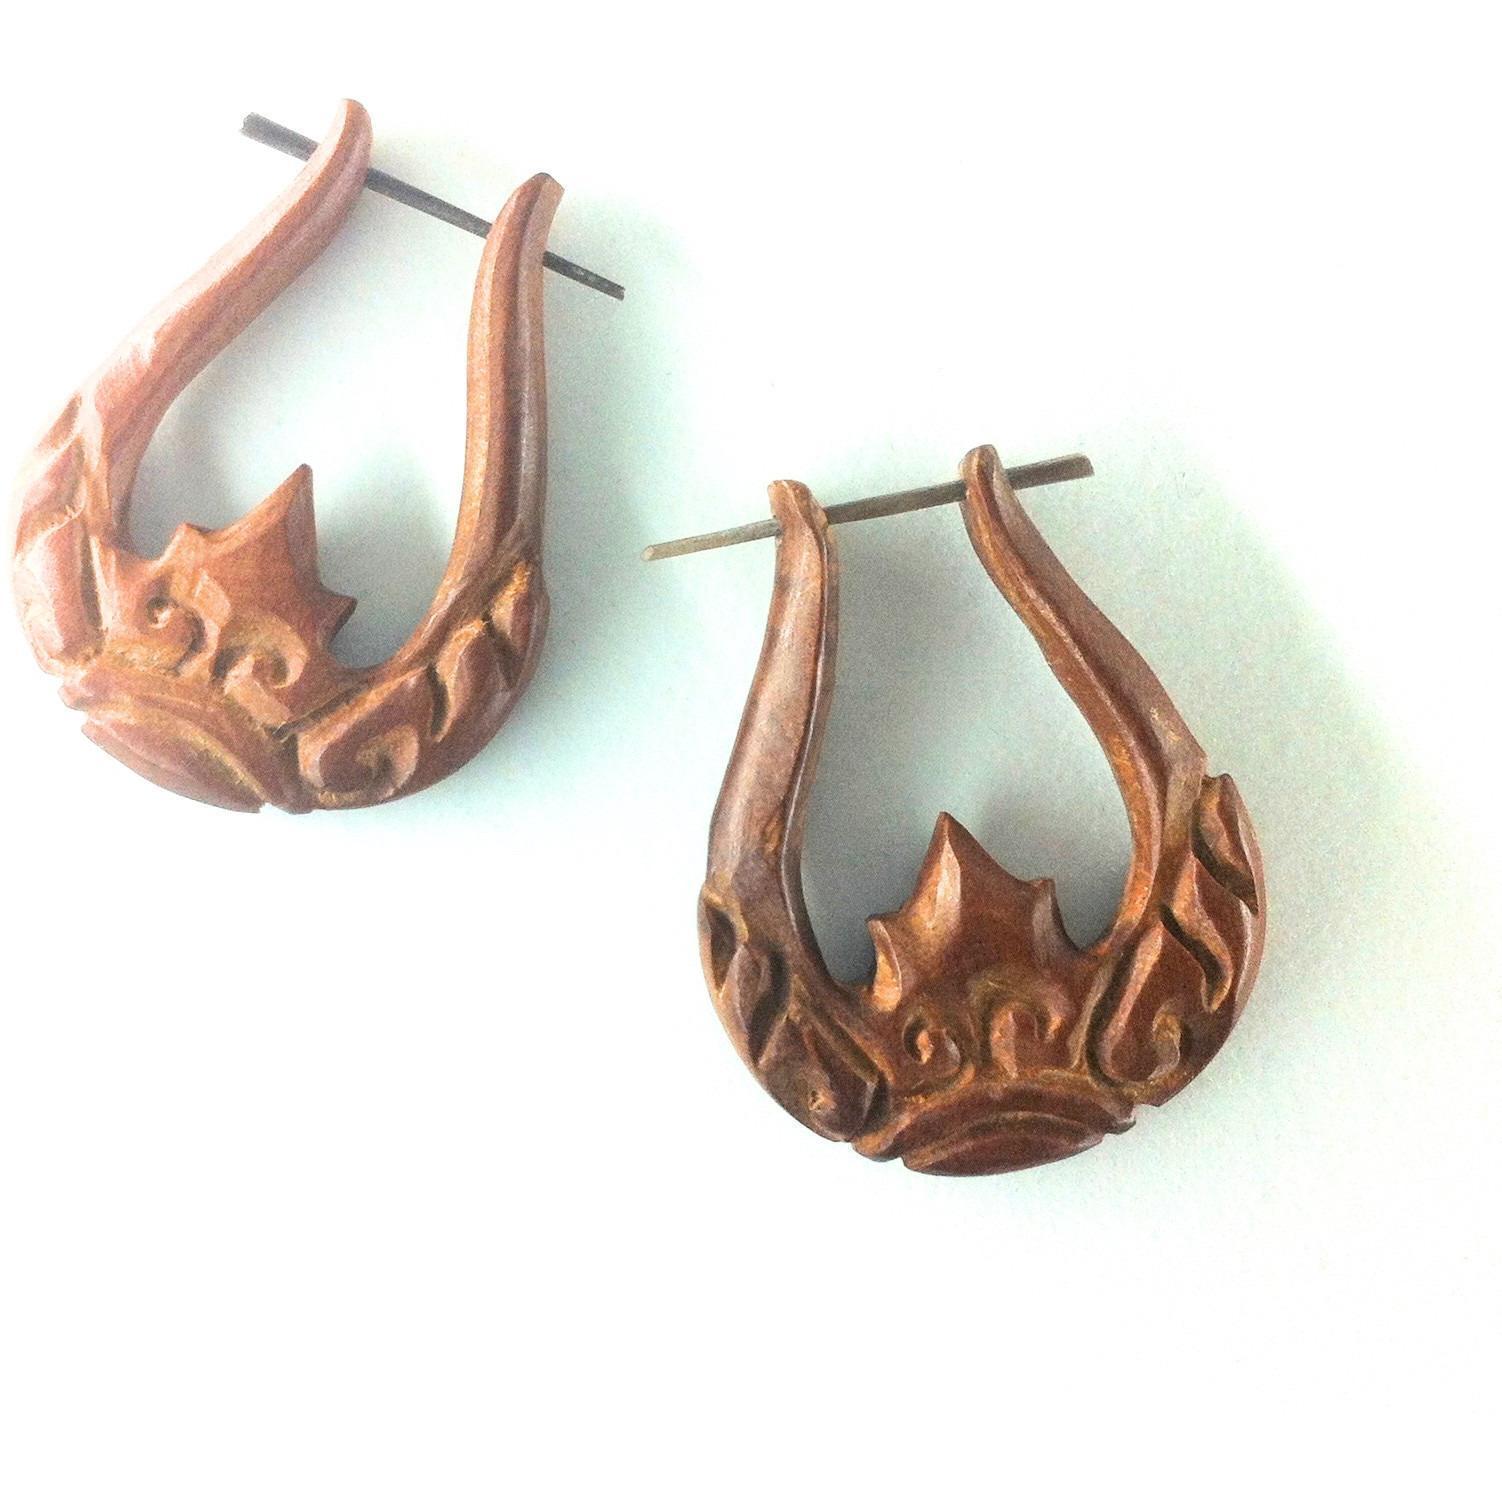 Natural Jewelry :|: Scepter. Wood Earrings. Tropical Sapote, Handmade Wooden Jewelry. | Wood Earrings